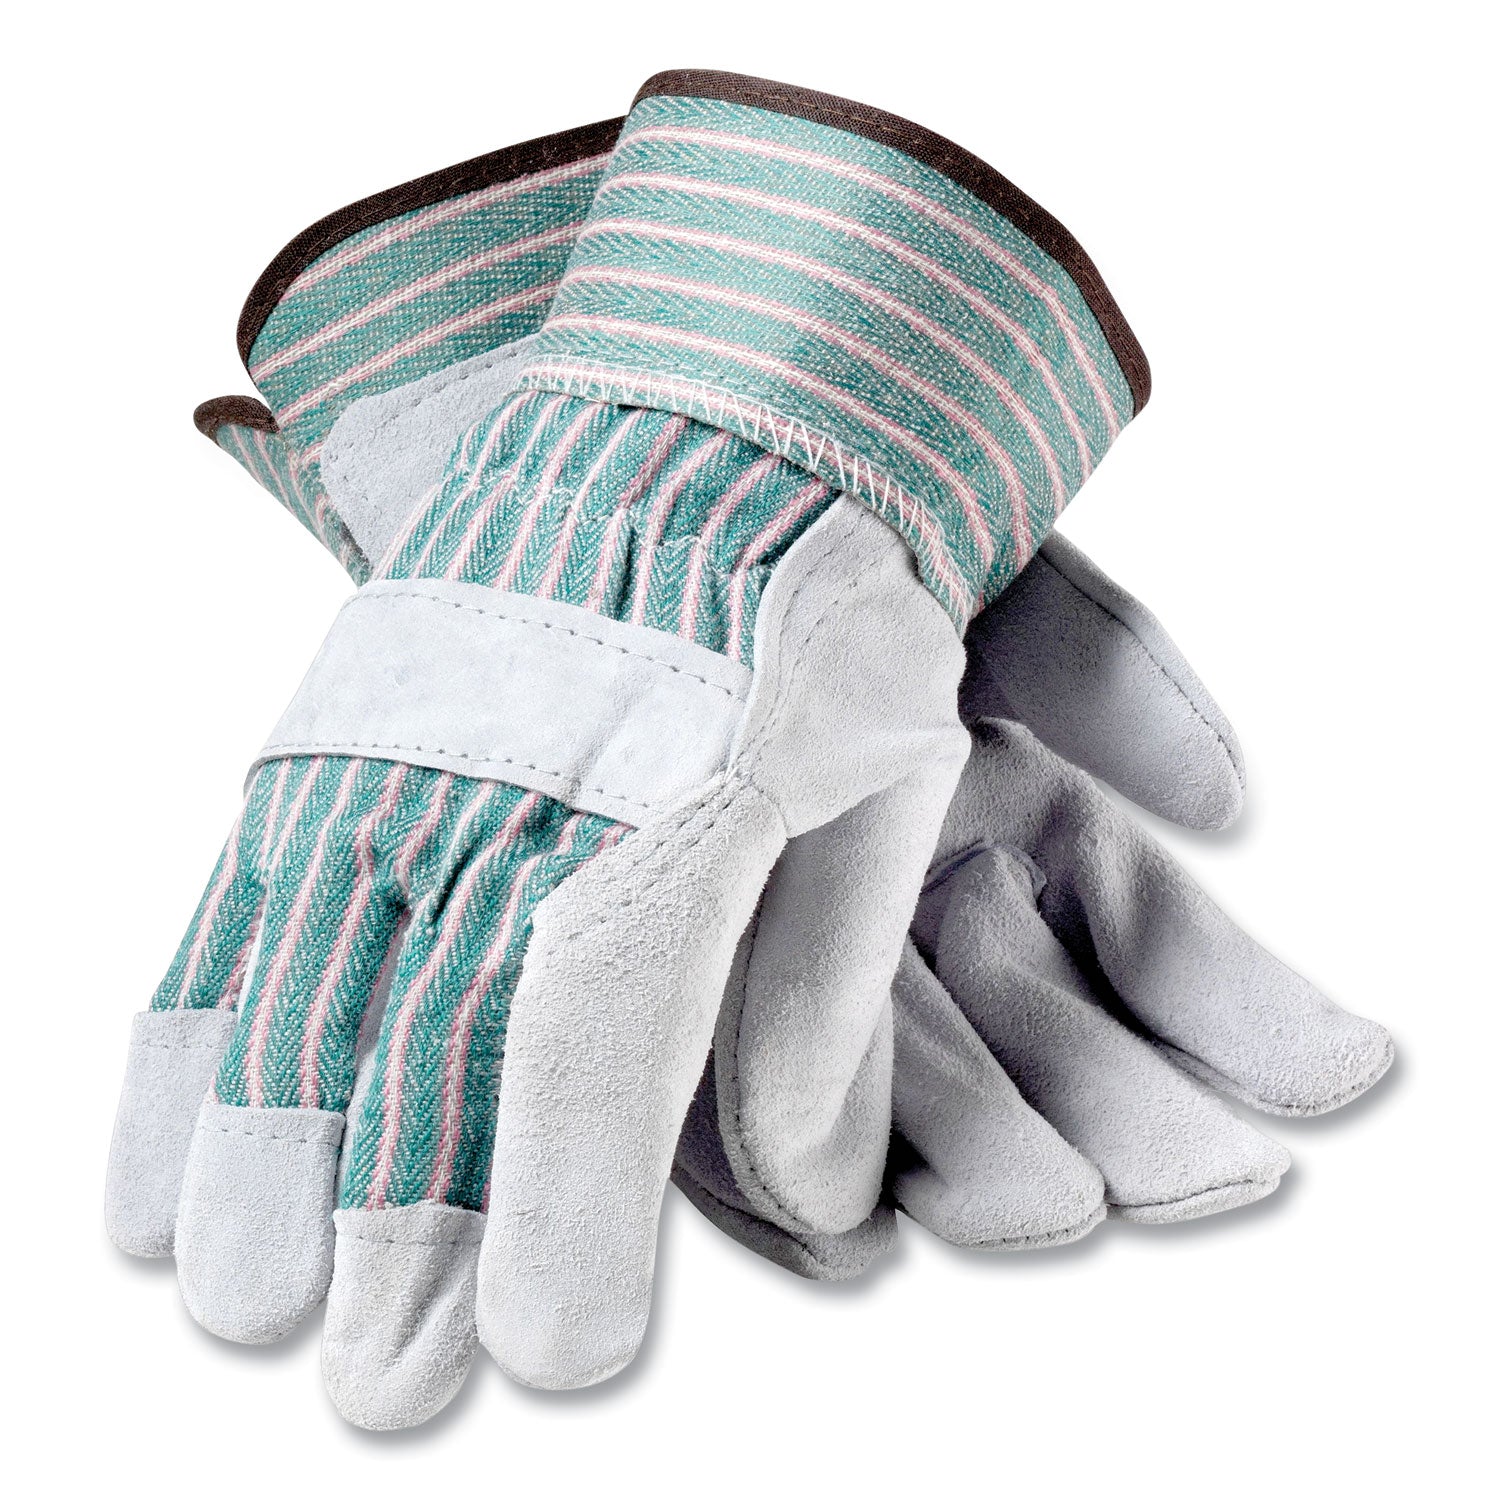 bronze-series-leather-fabric-work-gloves-x-large-size-10-gray-green-12-pairs_pid836563xl - 1